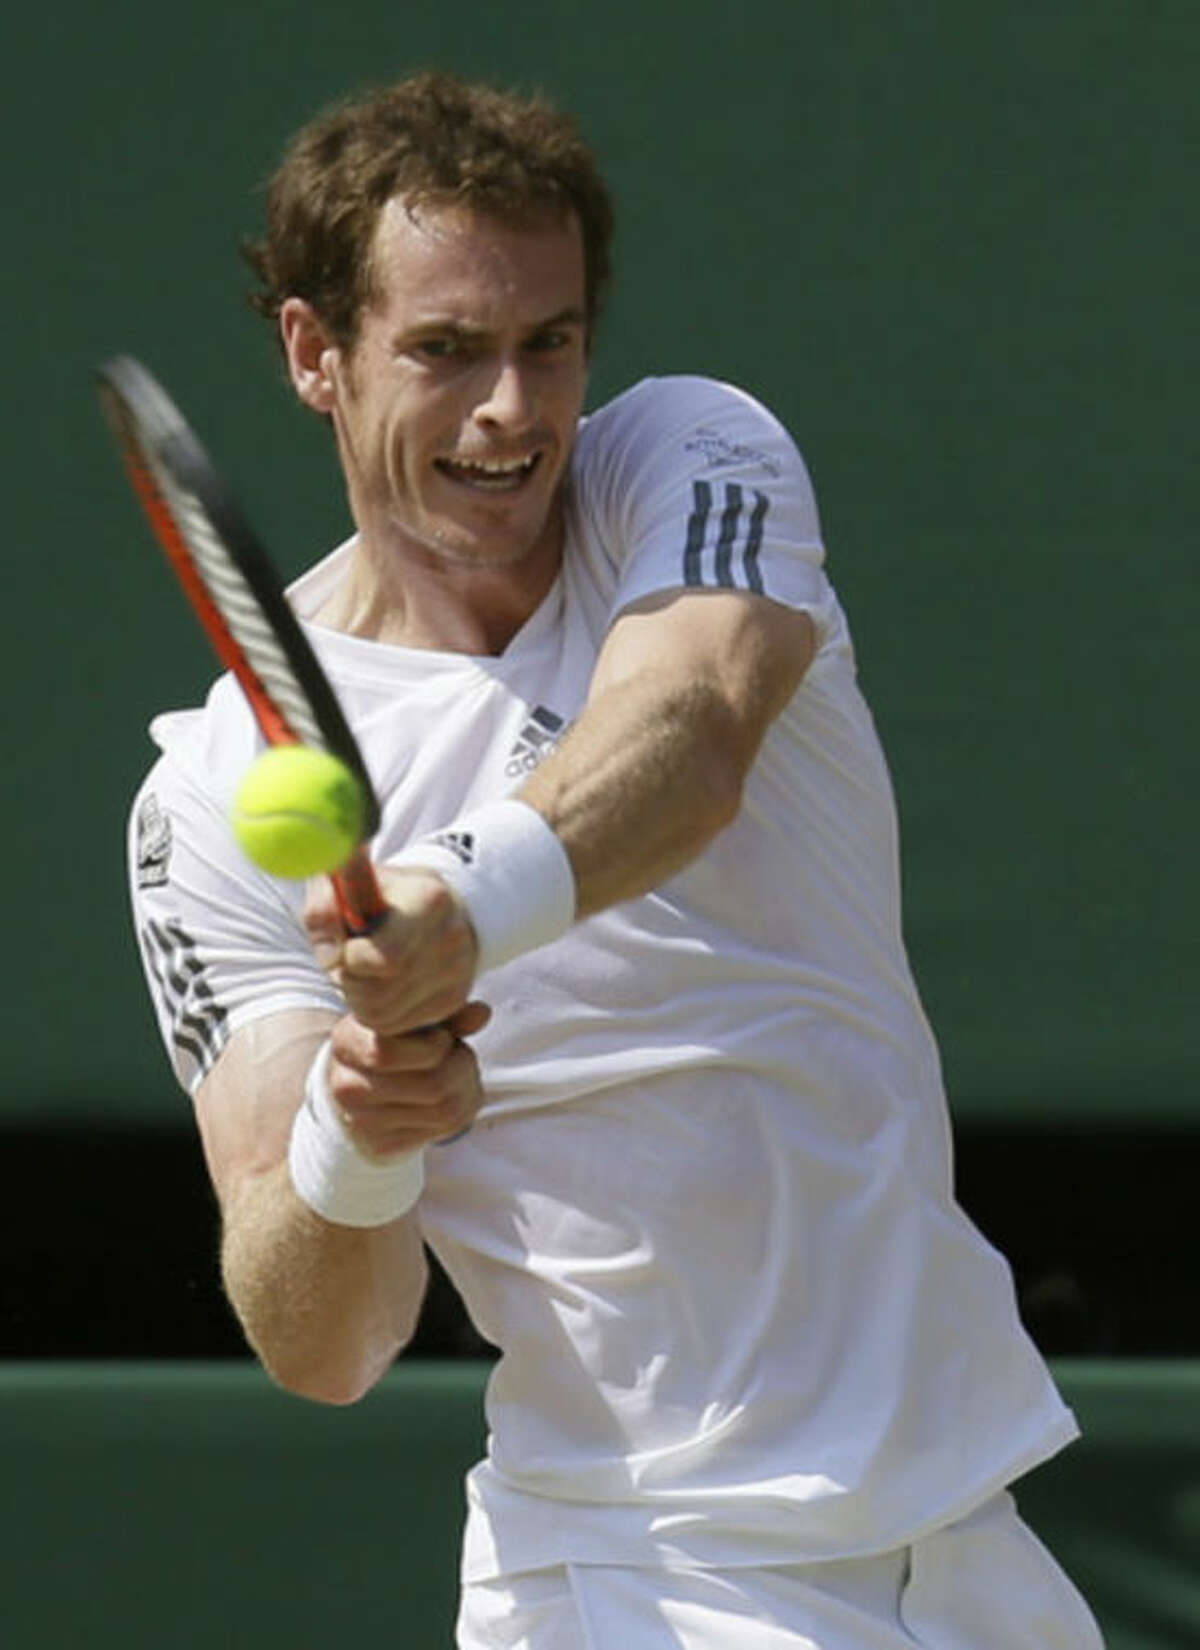 Andy Murray of Britain returns to Novak Djokovic of Serbia during the Men's singles final match at the All England Lawn Tennis Championships in Wimbledon, London, Sunday, July 7, 2013. (AP Photo/Alastair Grant)